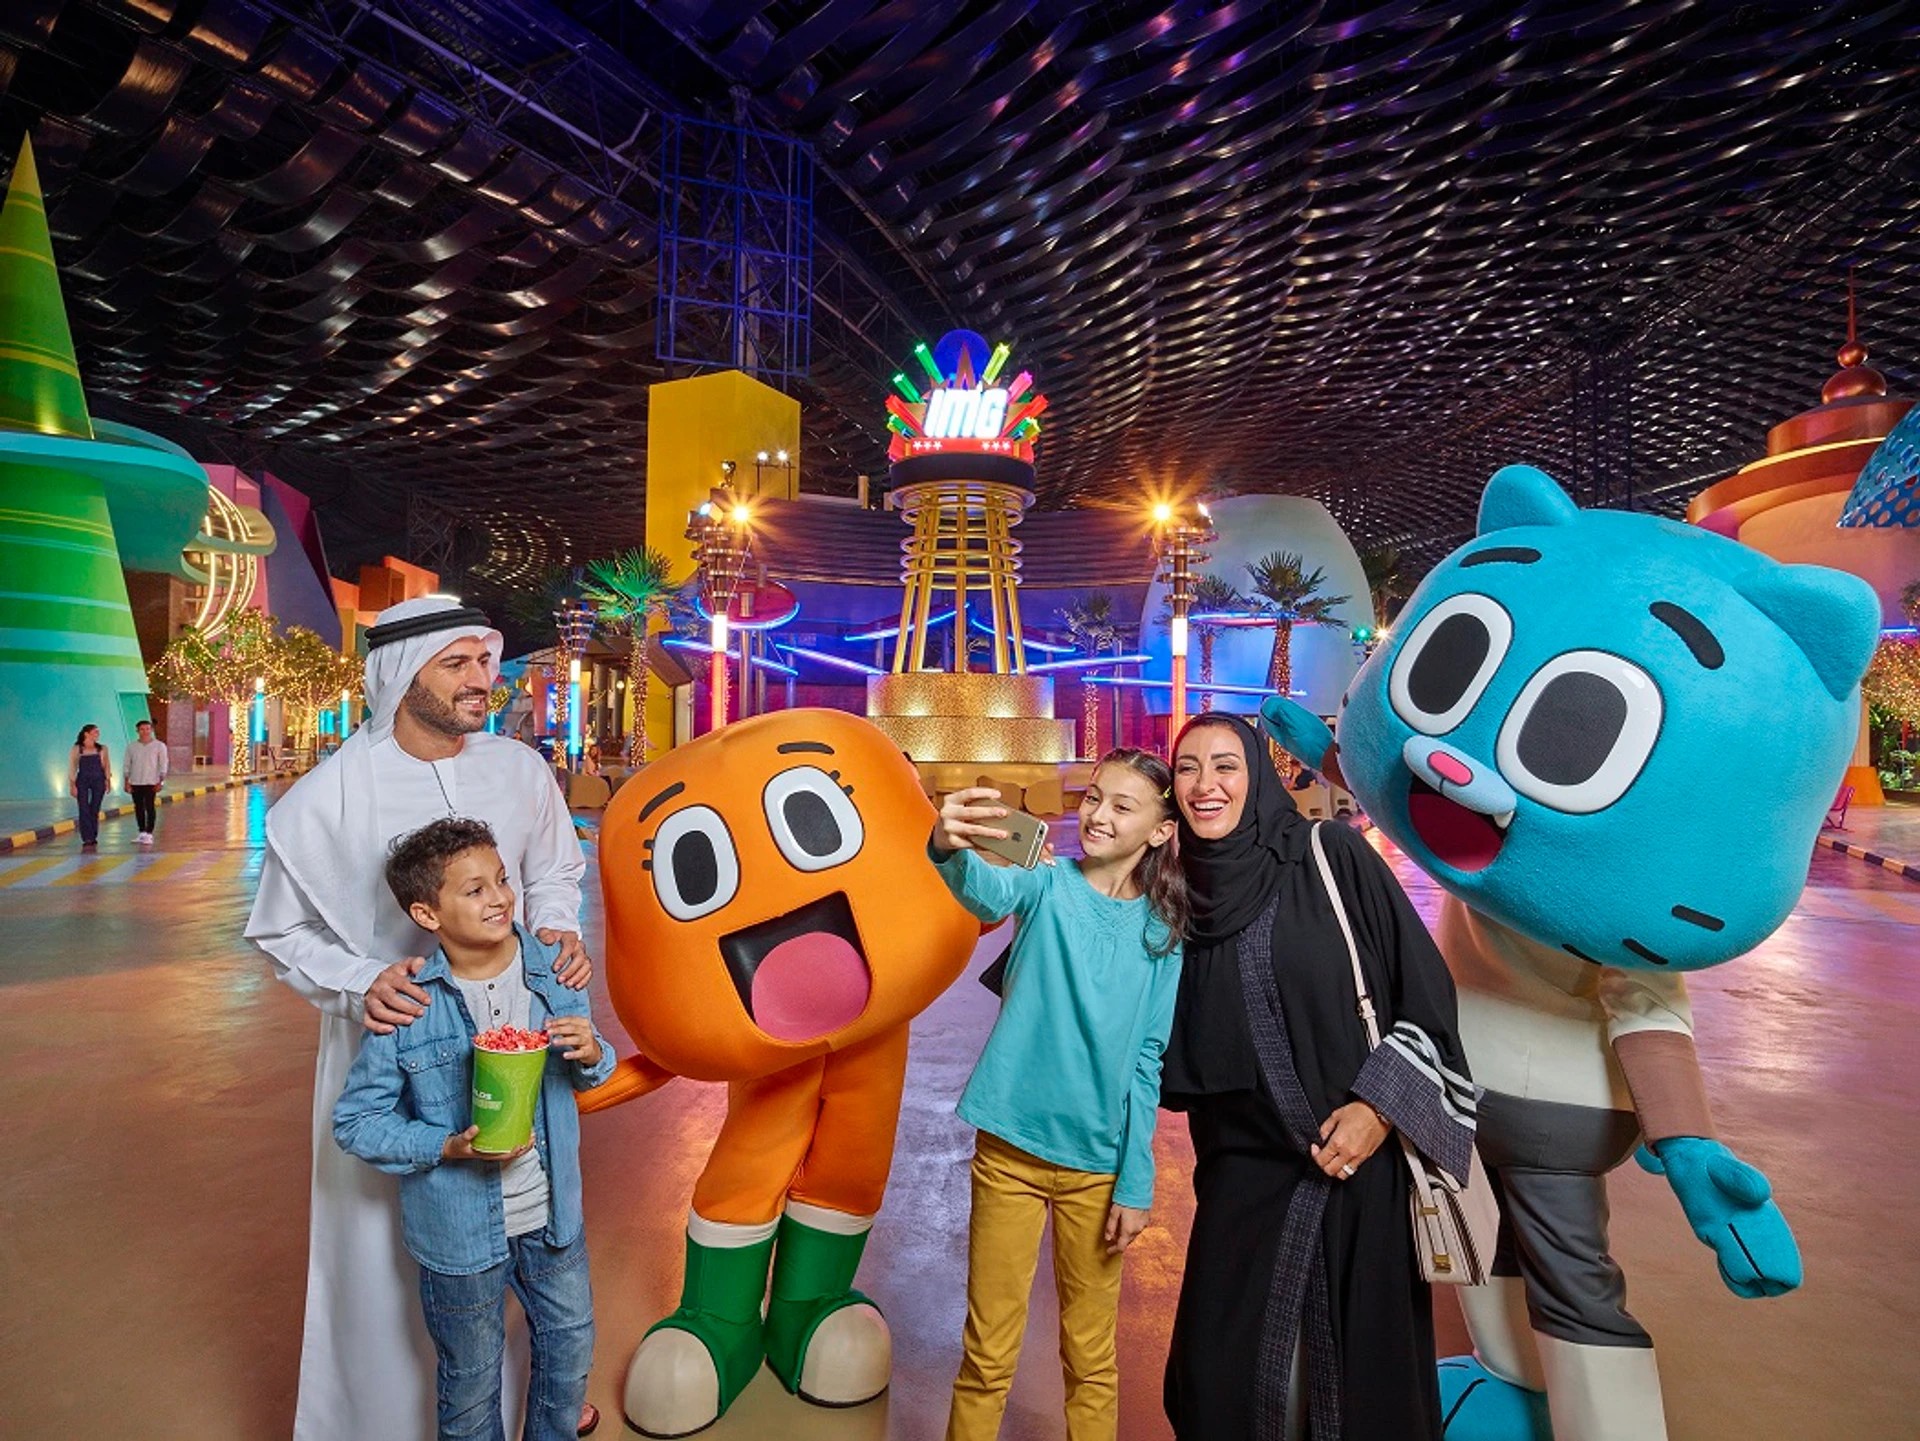 IMG Worlds of Adventure Celebrates Eid Al Fitr Holiday With Special Activities For The Entire Family